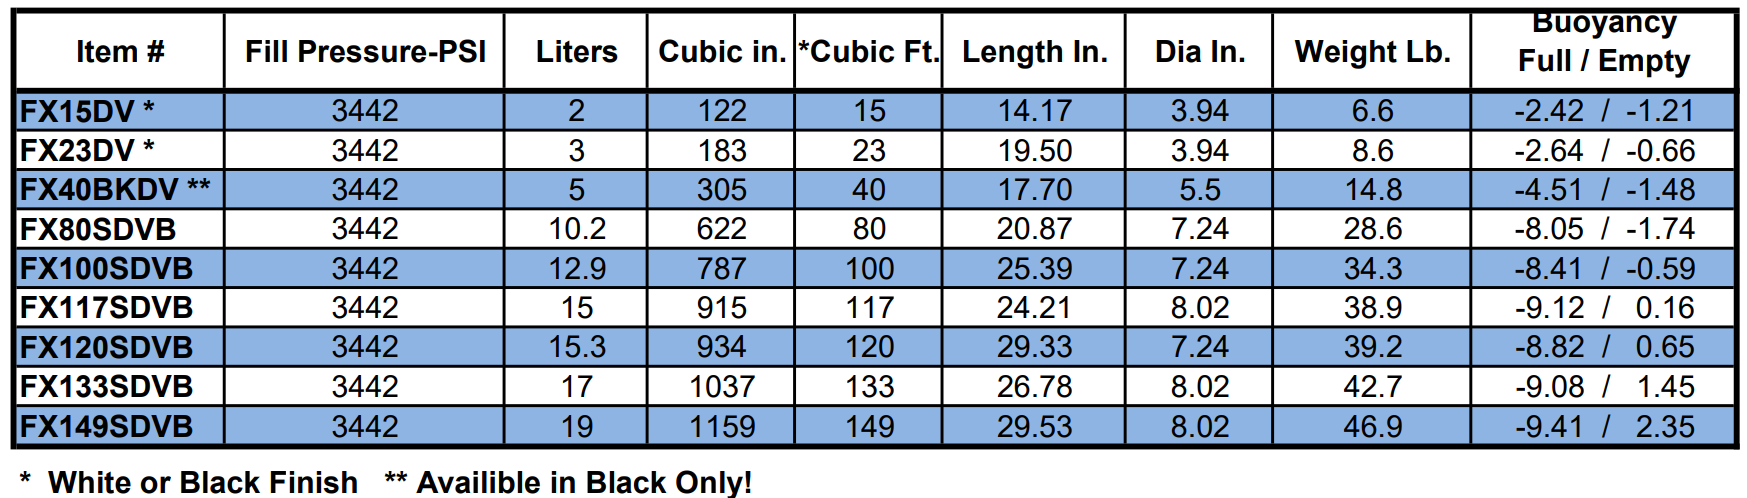 Comparision Chart for Faber HP Steel Tank Doubles Package - Gun Metal Grey